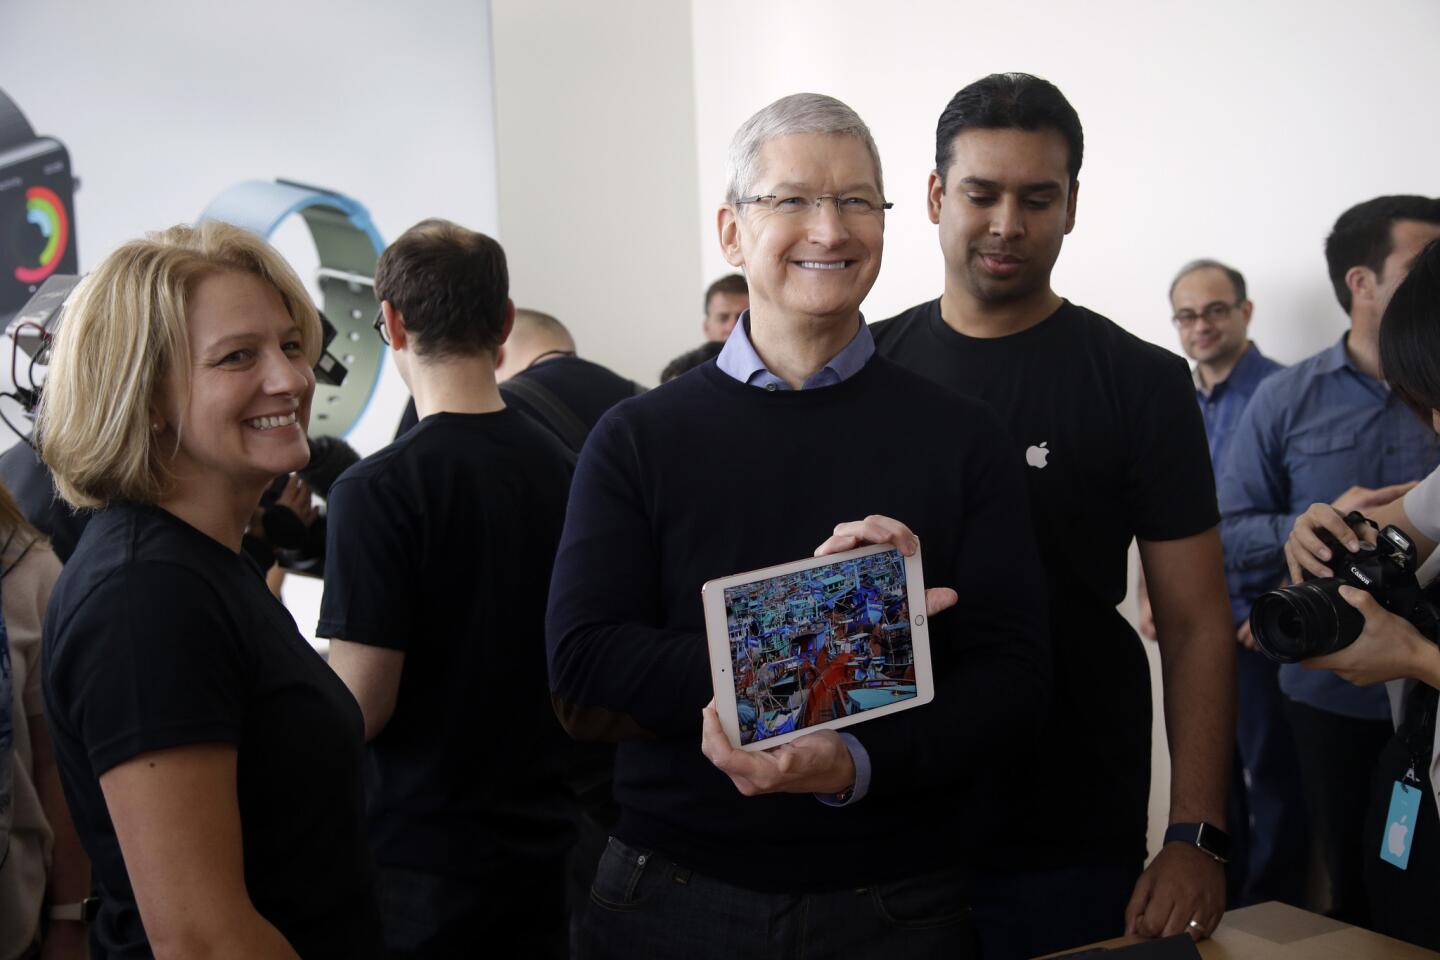 Apple CEO Tim Cook shows off a new iPad during an event at Apple headquarters.